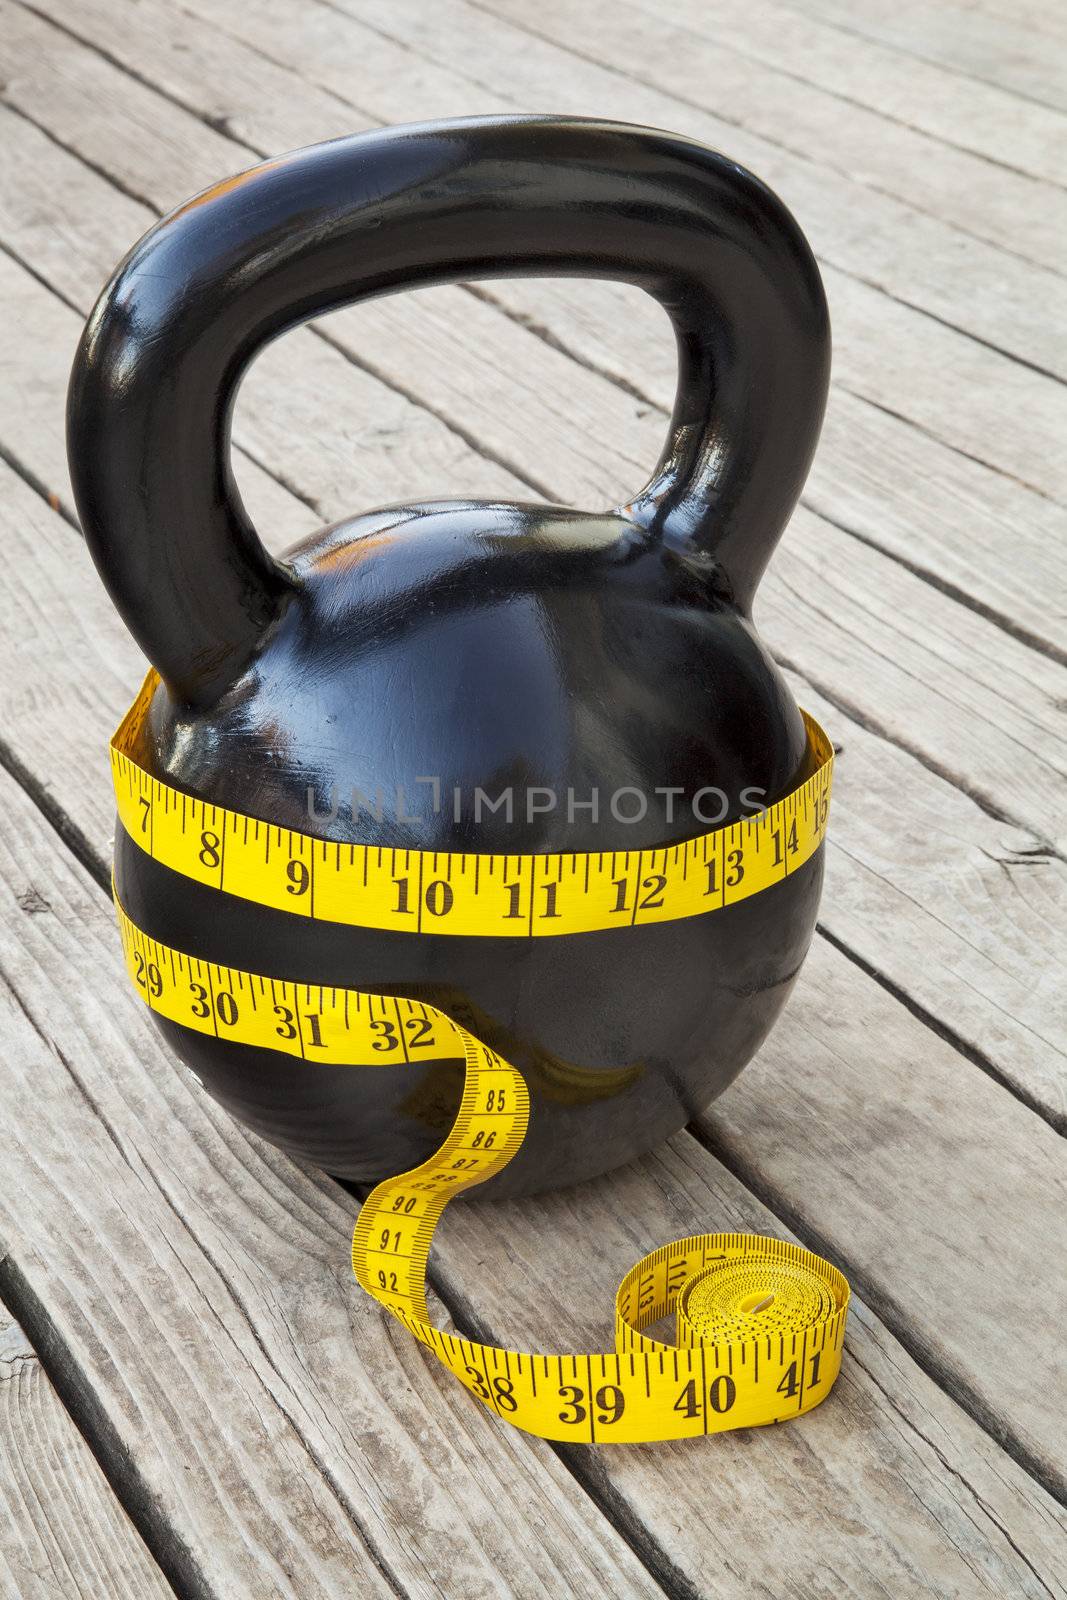 kettlebell and measuring tape on wooden deck - fitness and diet concept